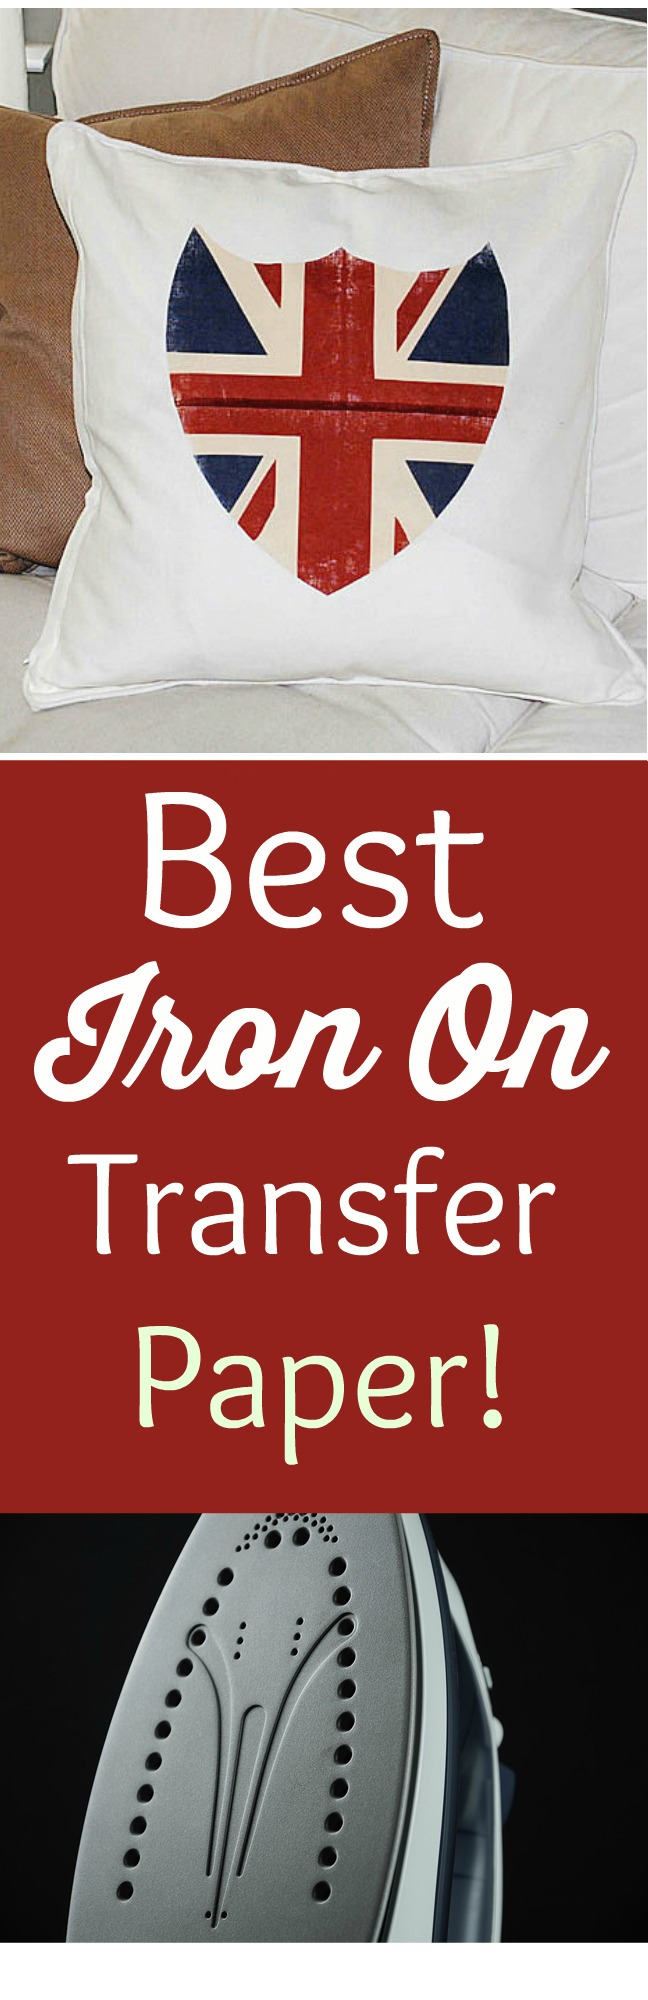 Best Iron On Transfer Paper! - Union Jack Shield Pillow and Printable - The Graphics Fairy